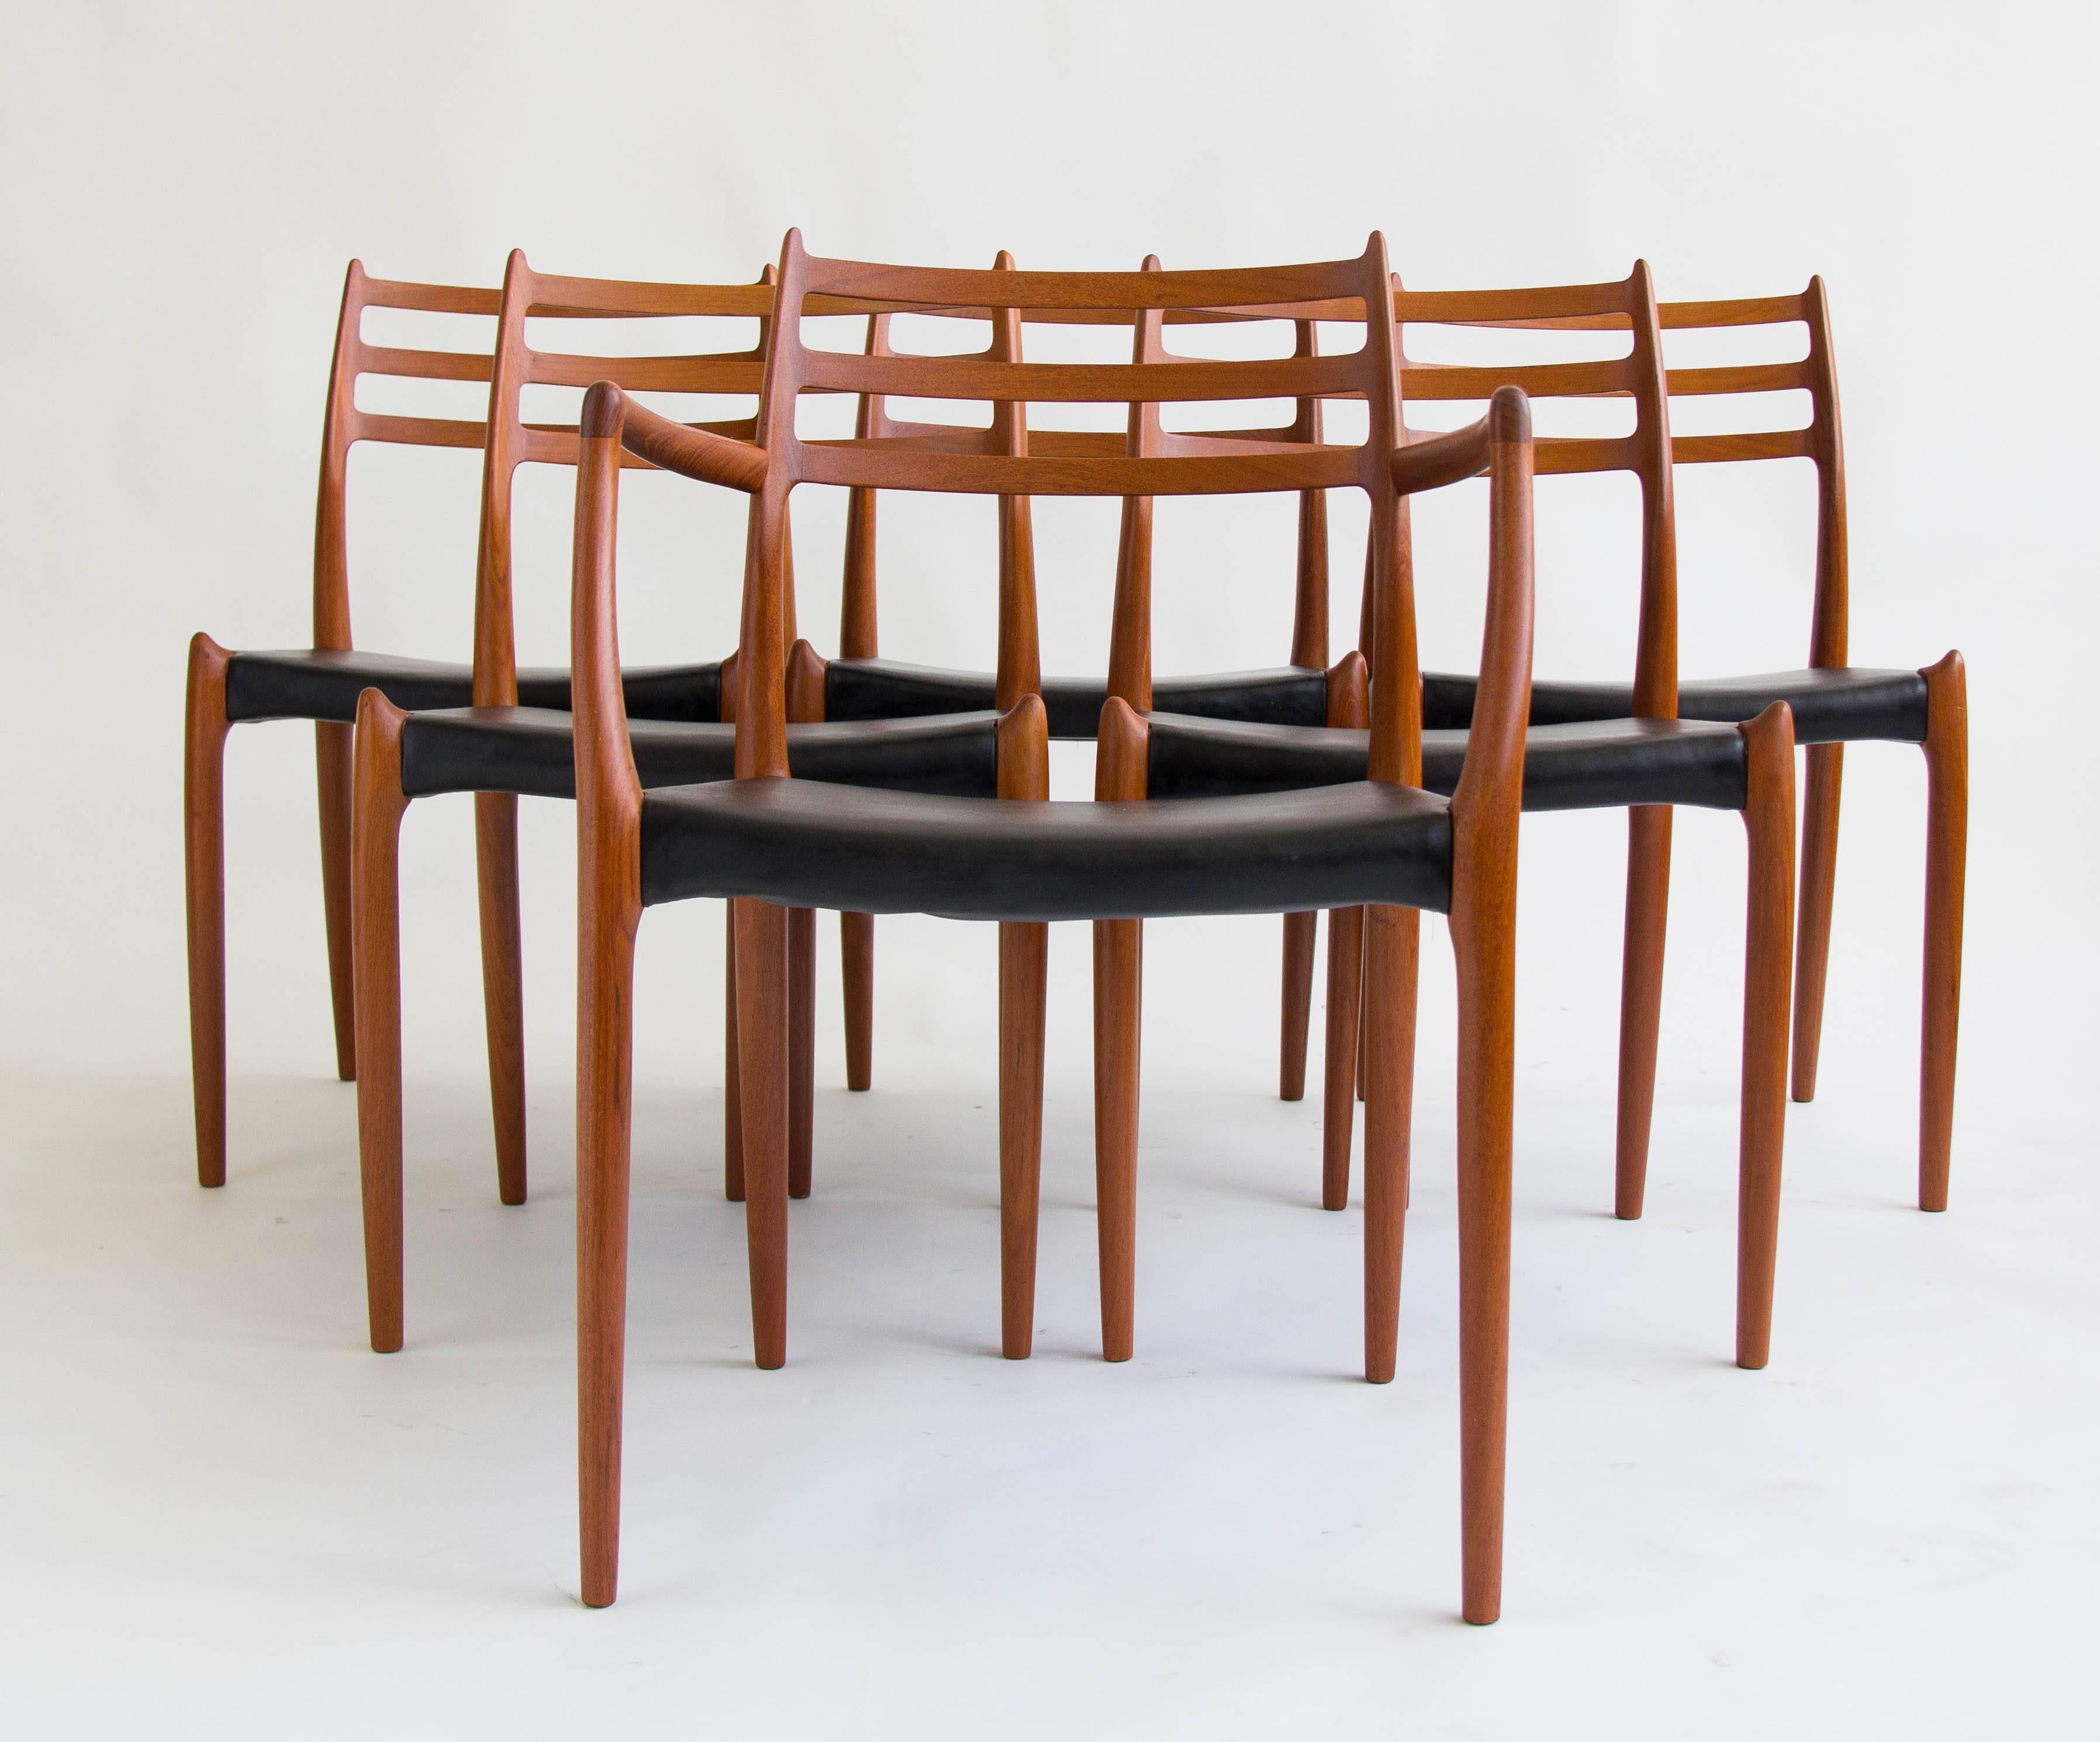 Set of six teak dining chairs designed by Niels Møller in 1962 and manufactured by JL Møllers Møbelfabrik of Denmark, with original black vinyl seats. The chairs have a curved backrest with three horizontal supports. The set is comprised of one